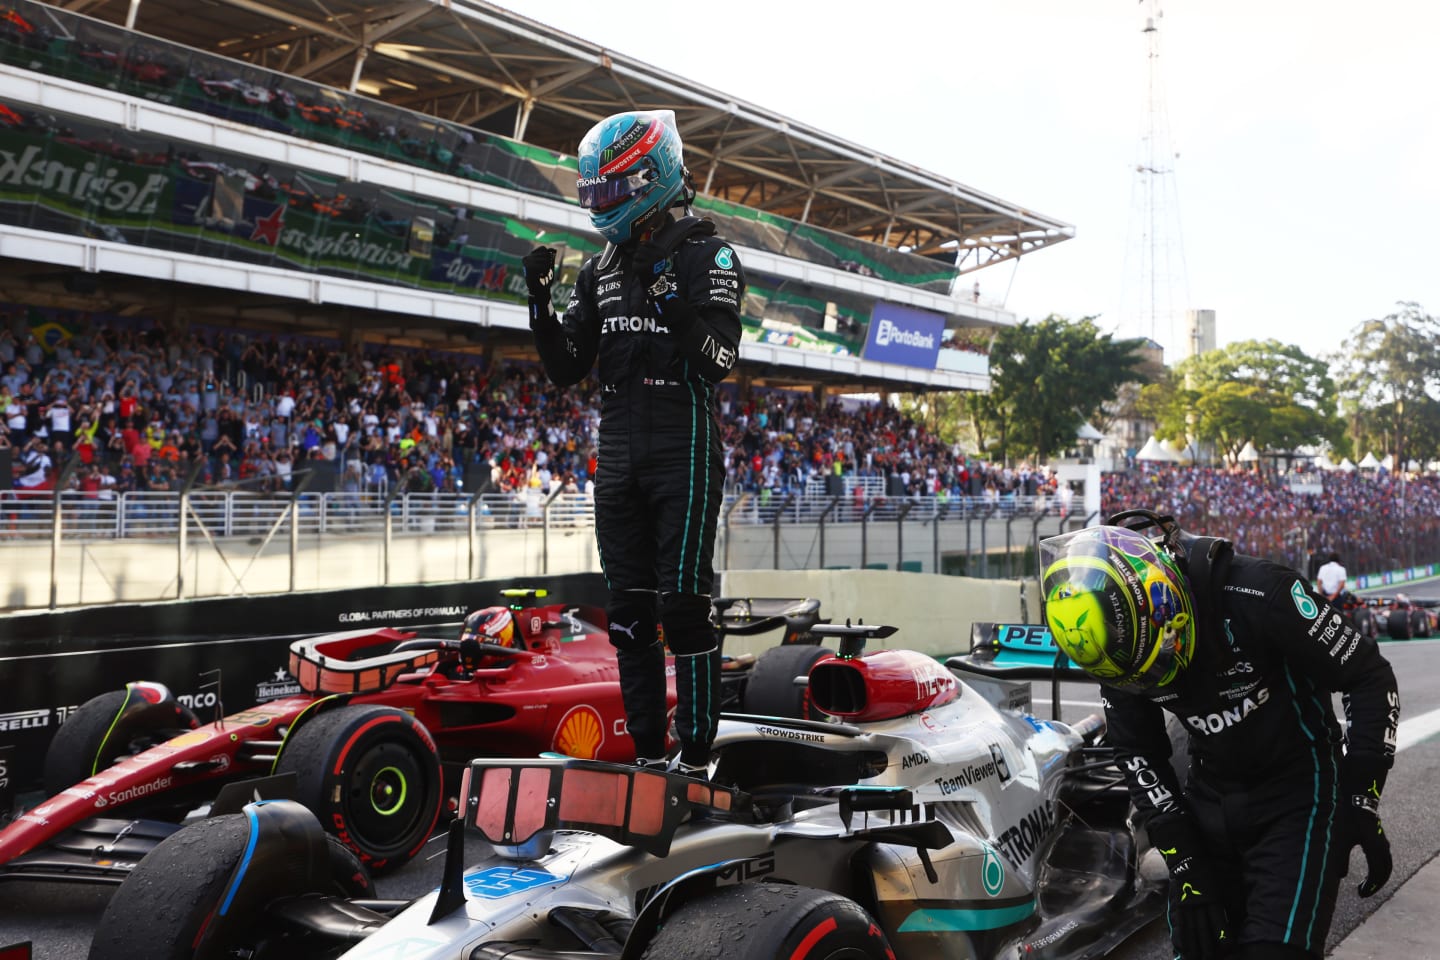 SAO PAULO, BRAZIL - NOVEMBER 12: Sprint winner George Russell of Great Britain and Mercedes celebrates in parc ferme during the Sprint ahead of the F1 Grand Prix of Brazil at Autodromo Jose Carlos Pace on November 12, 2022 in Sao Paulo, Brazil. (Photo by Bryn Lennon - Formula 1/Formula 1 via Getty Images)